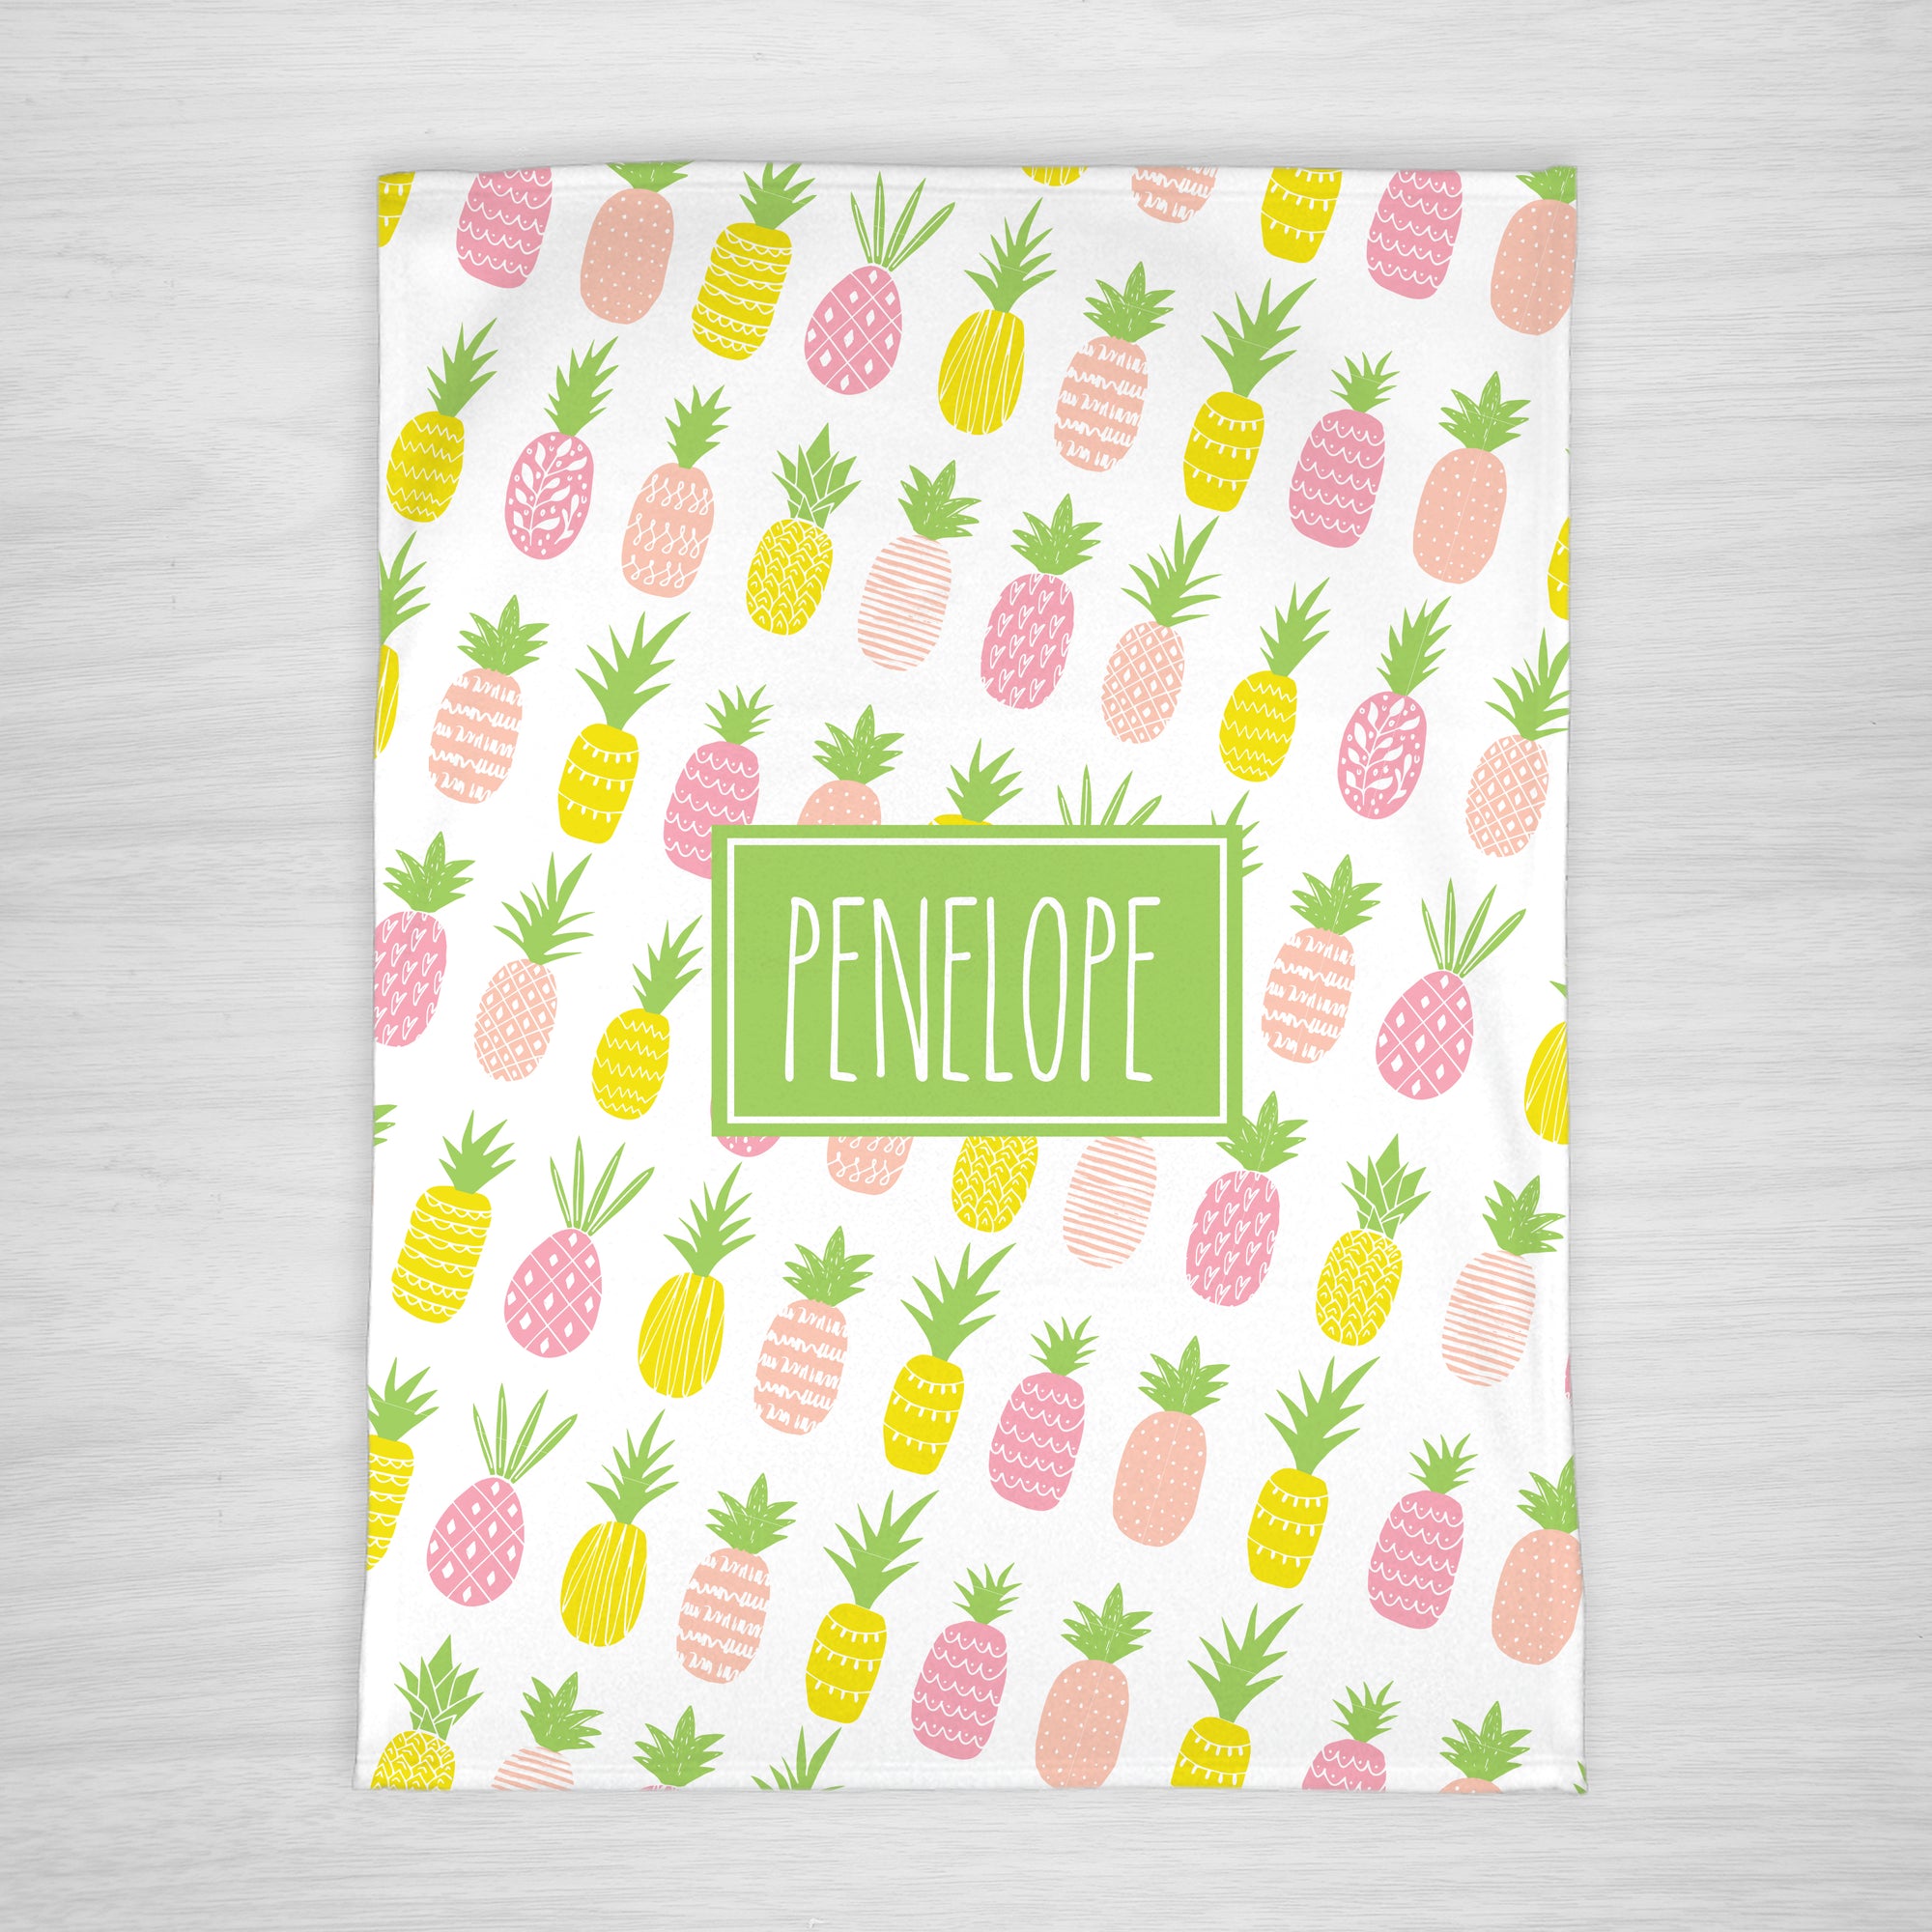 Pineapple name baby blanket, personalized, in pink, yellow and green